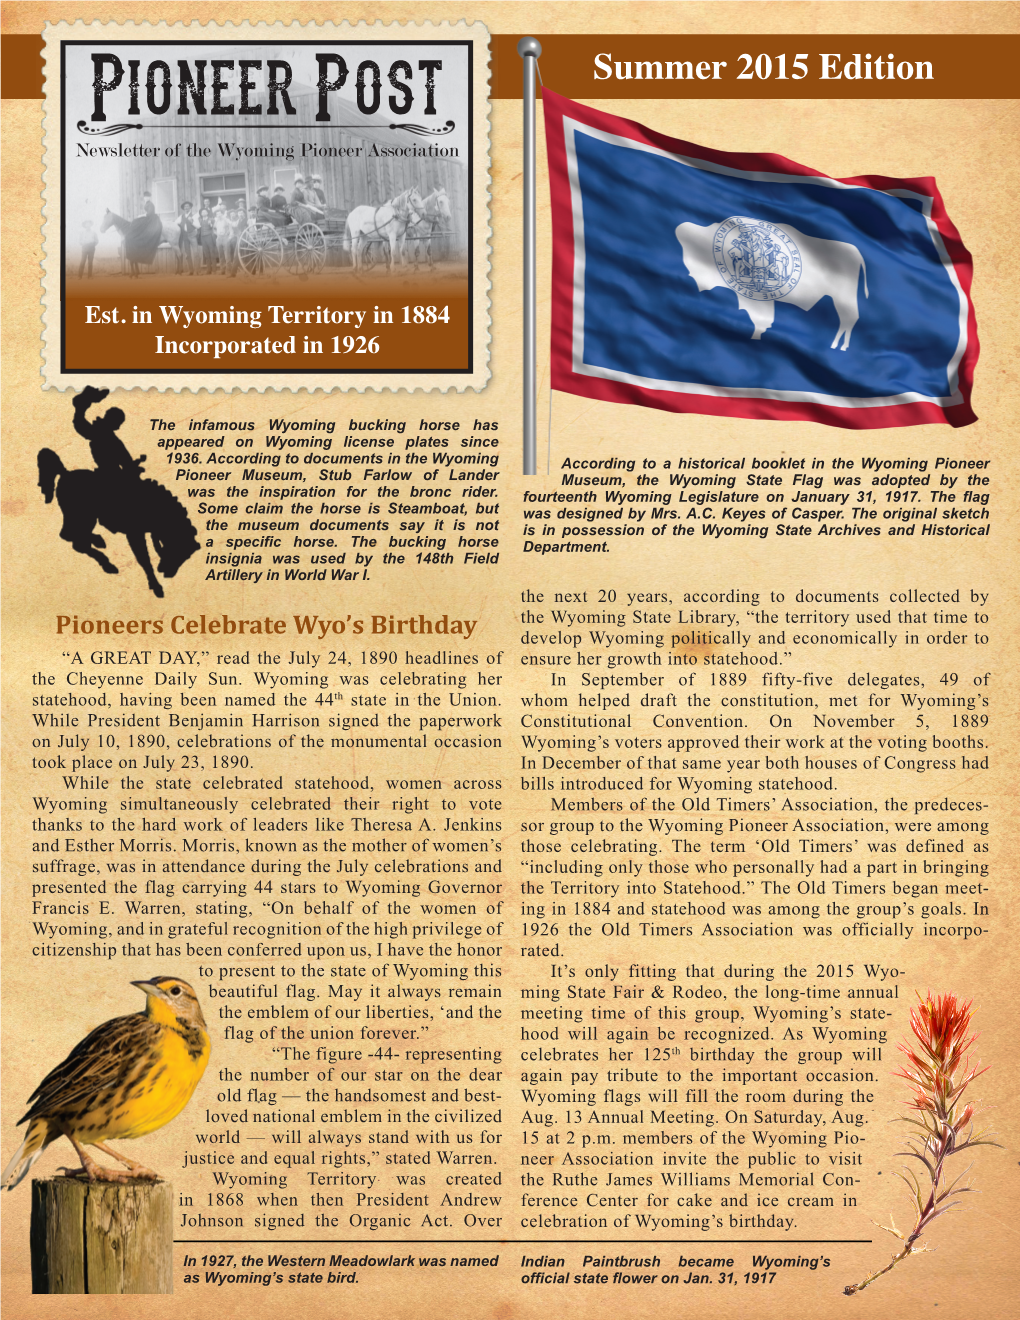 Pioneer Post Summer 2015 Edition Newsletter of the Wyoming Pioneer Association